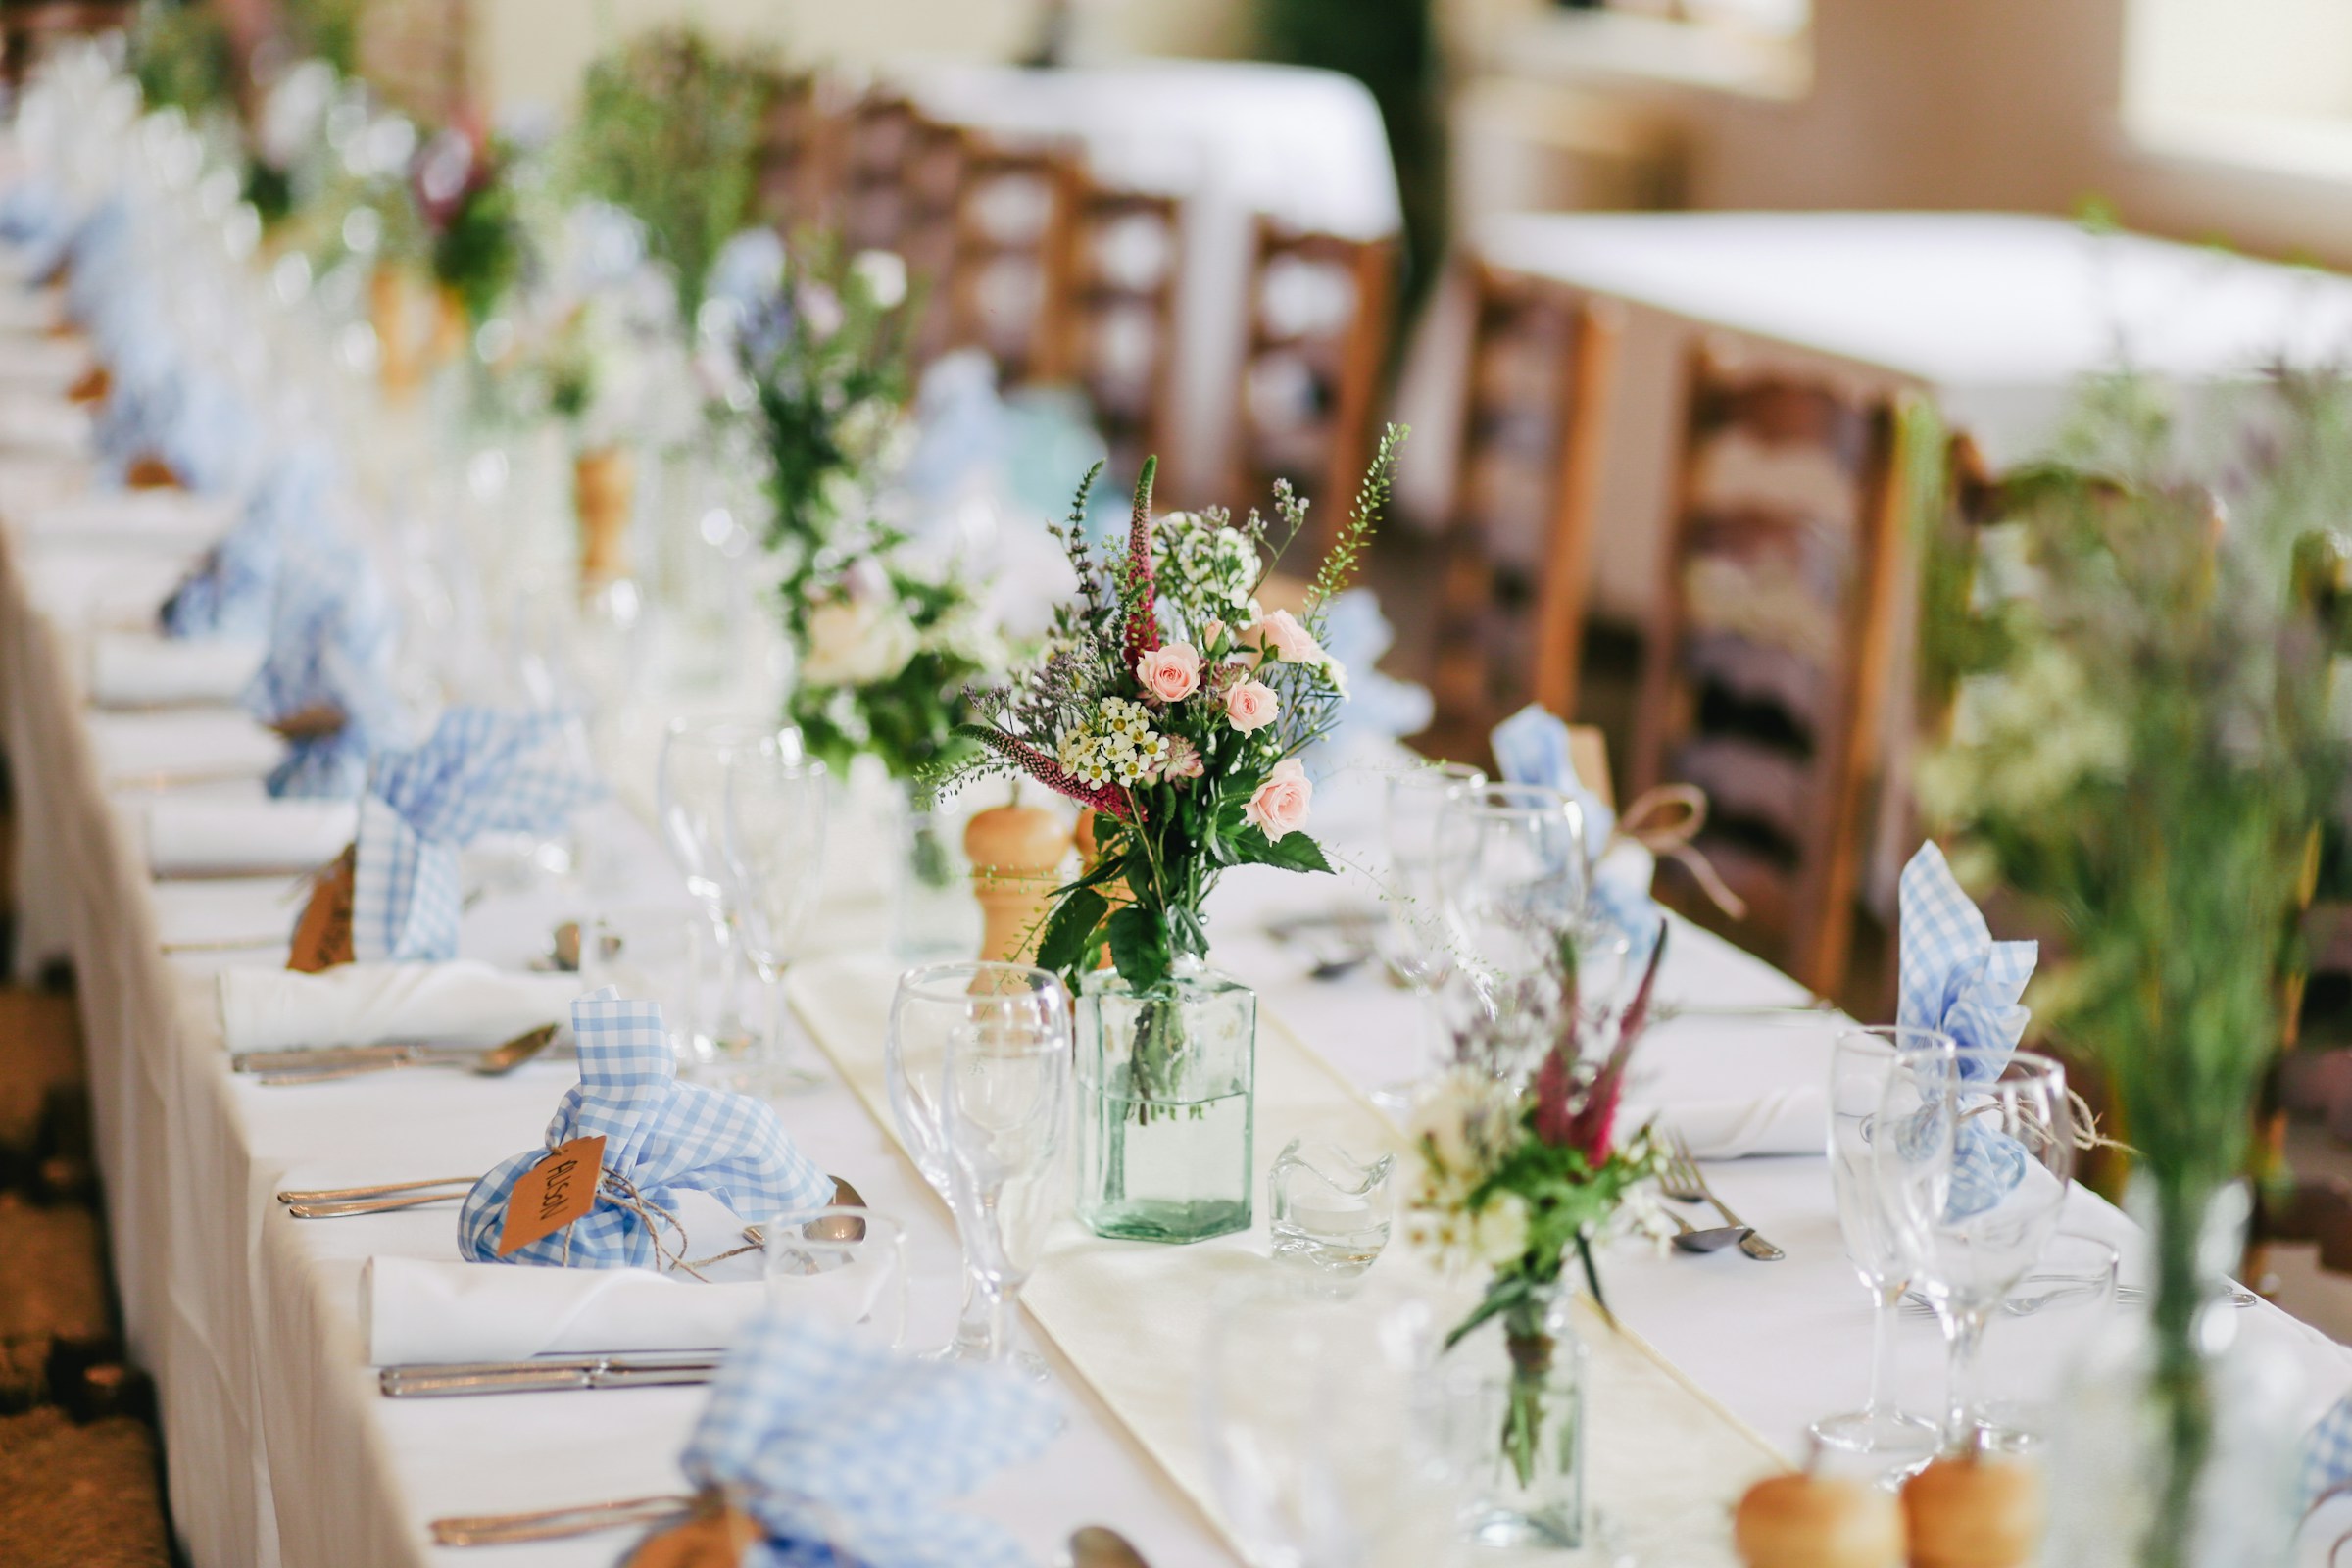 Close-up of a wedding dinner table | Source: Unsplash